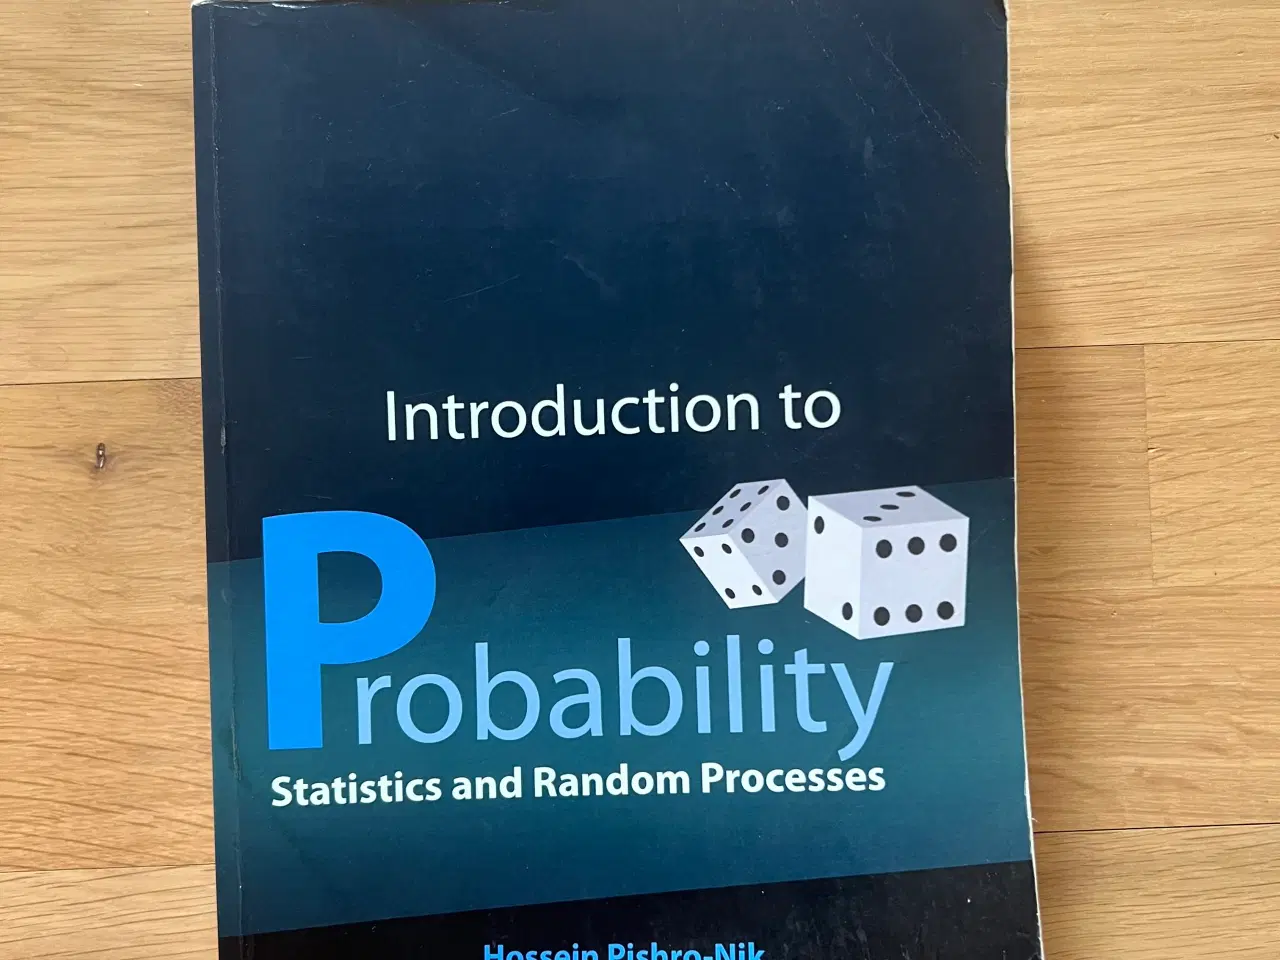 Billede 1 - Introduction to Probability Statistics and Random 